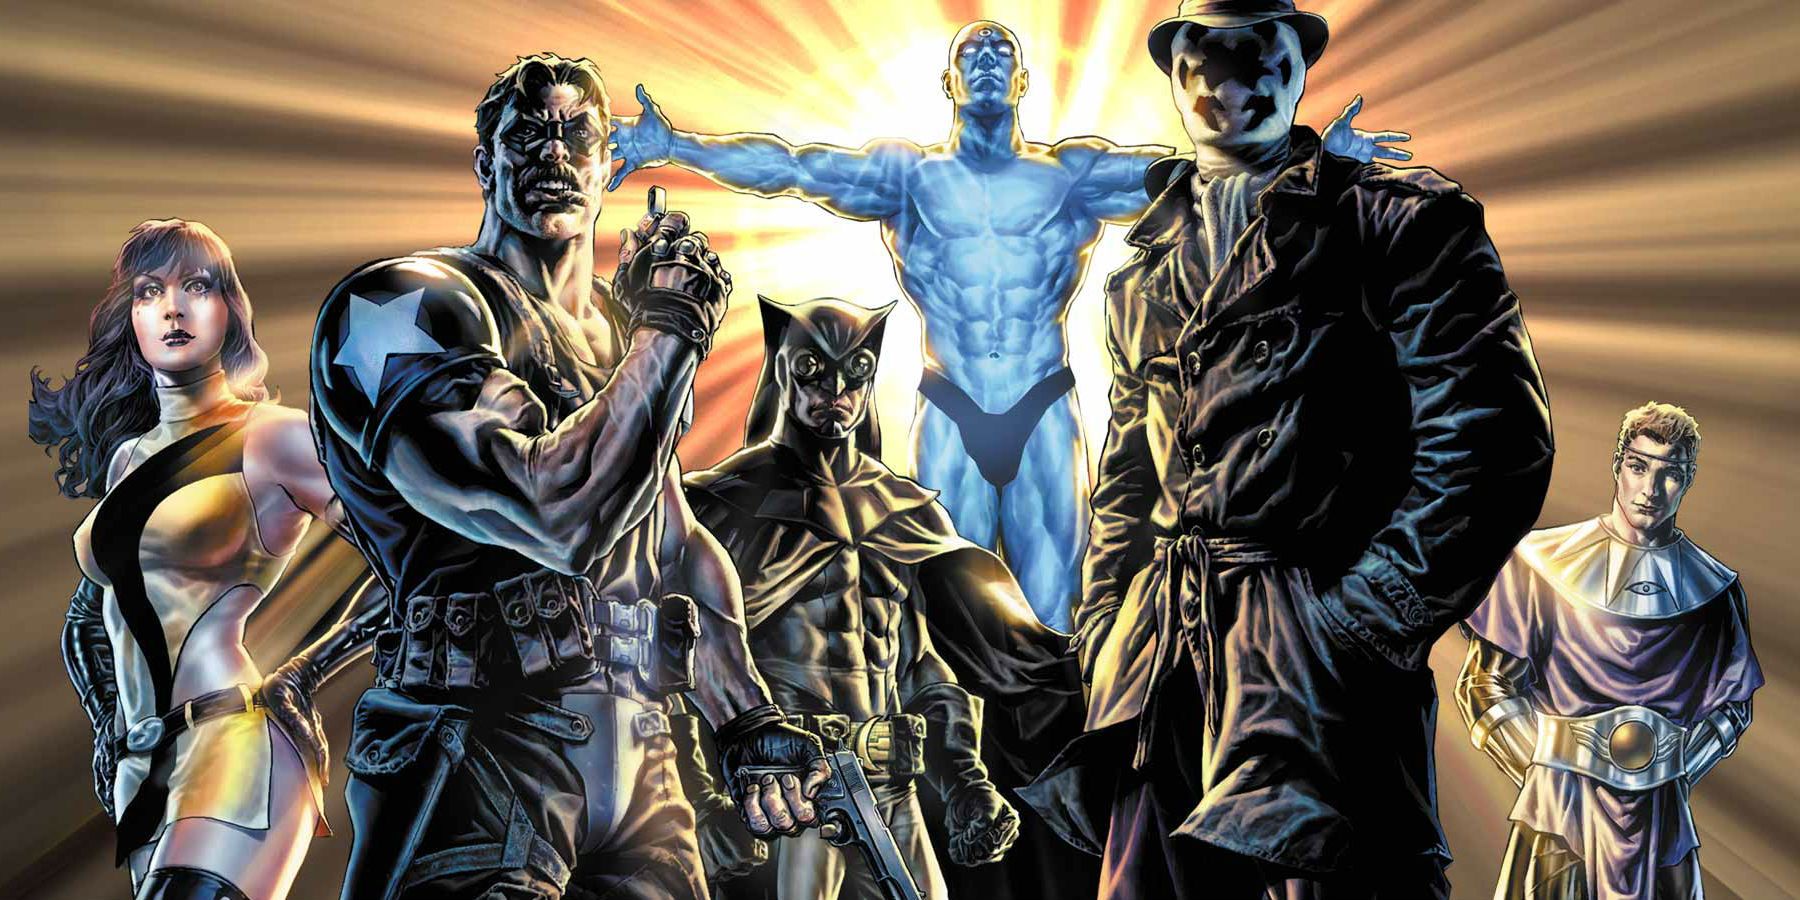 Who Should Star In HBO’s Watchmen?